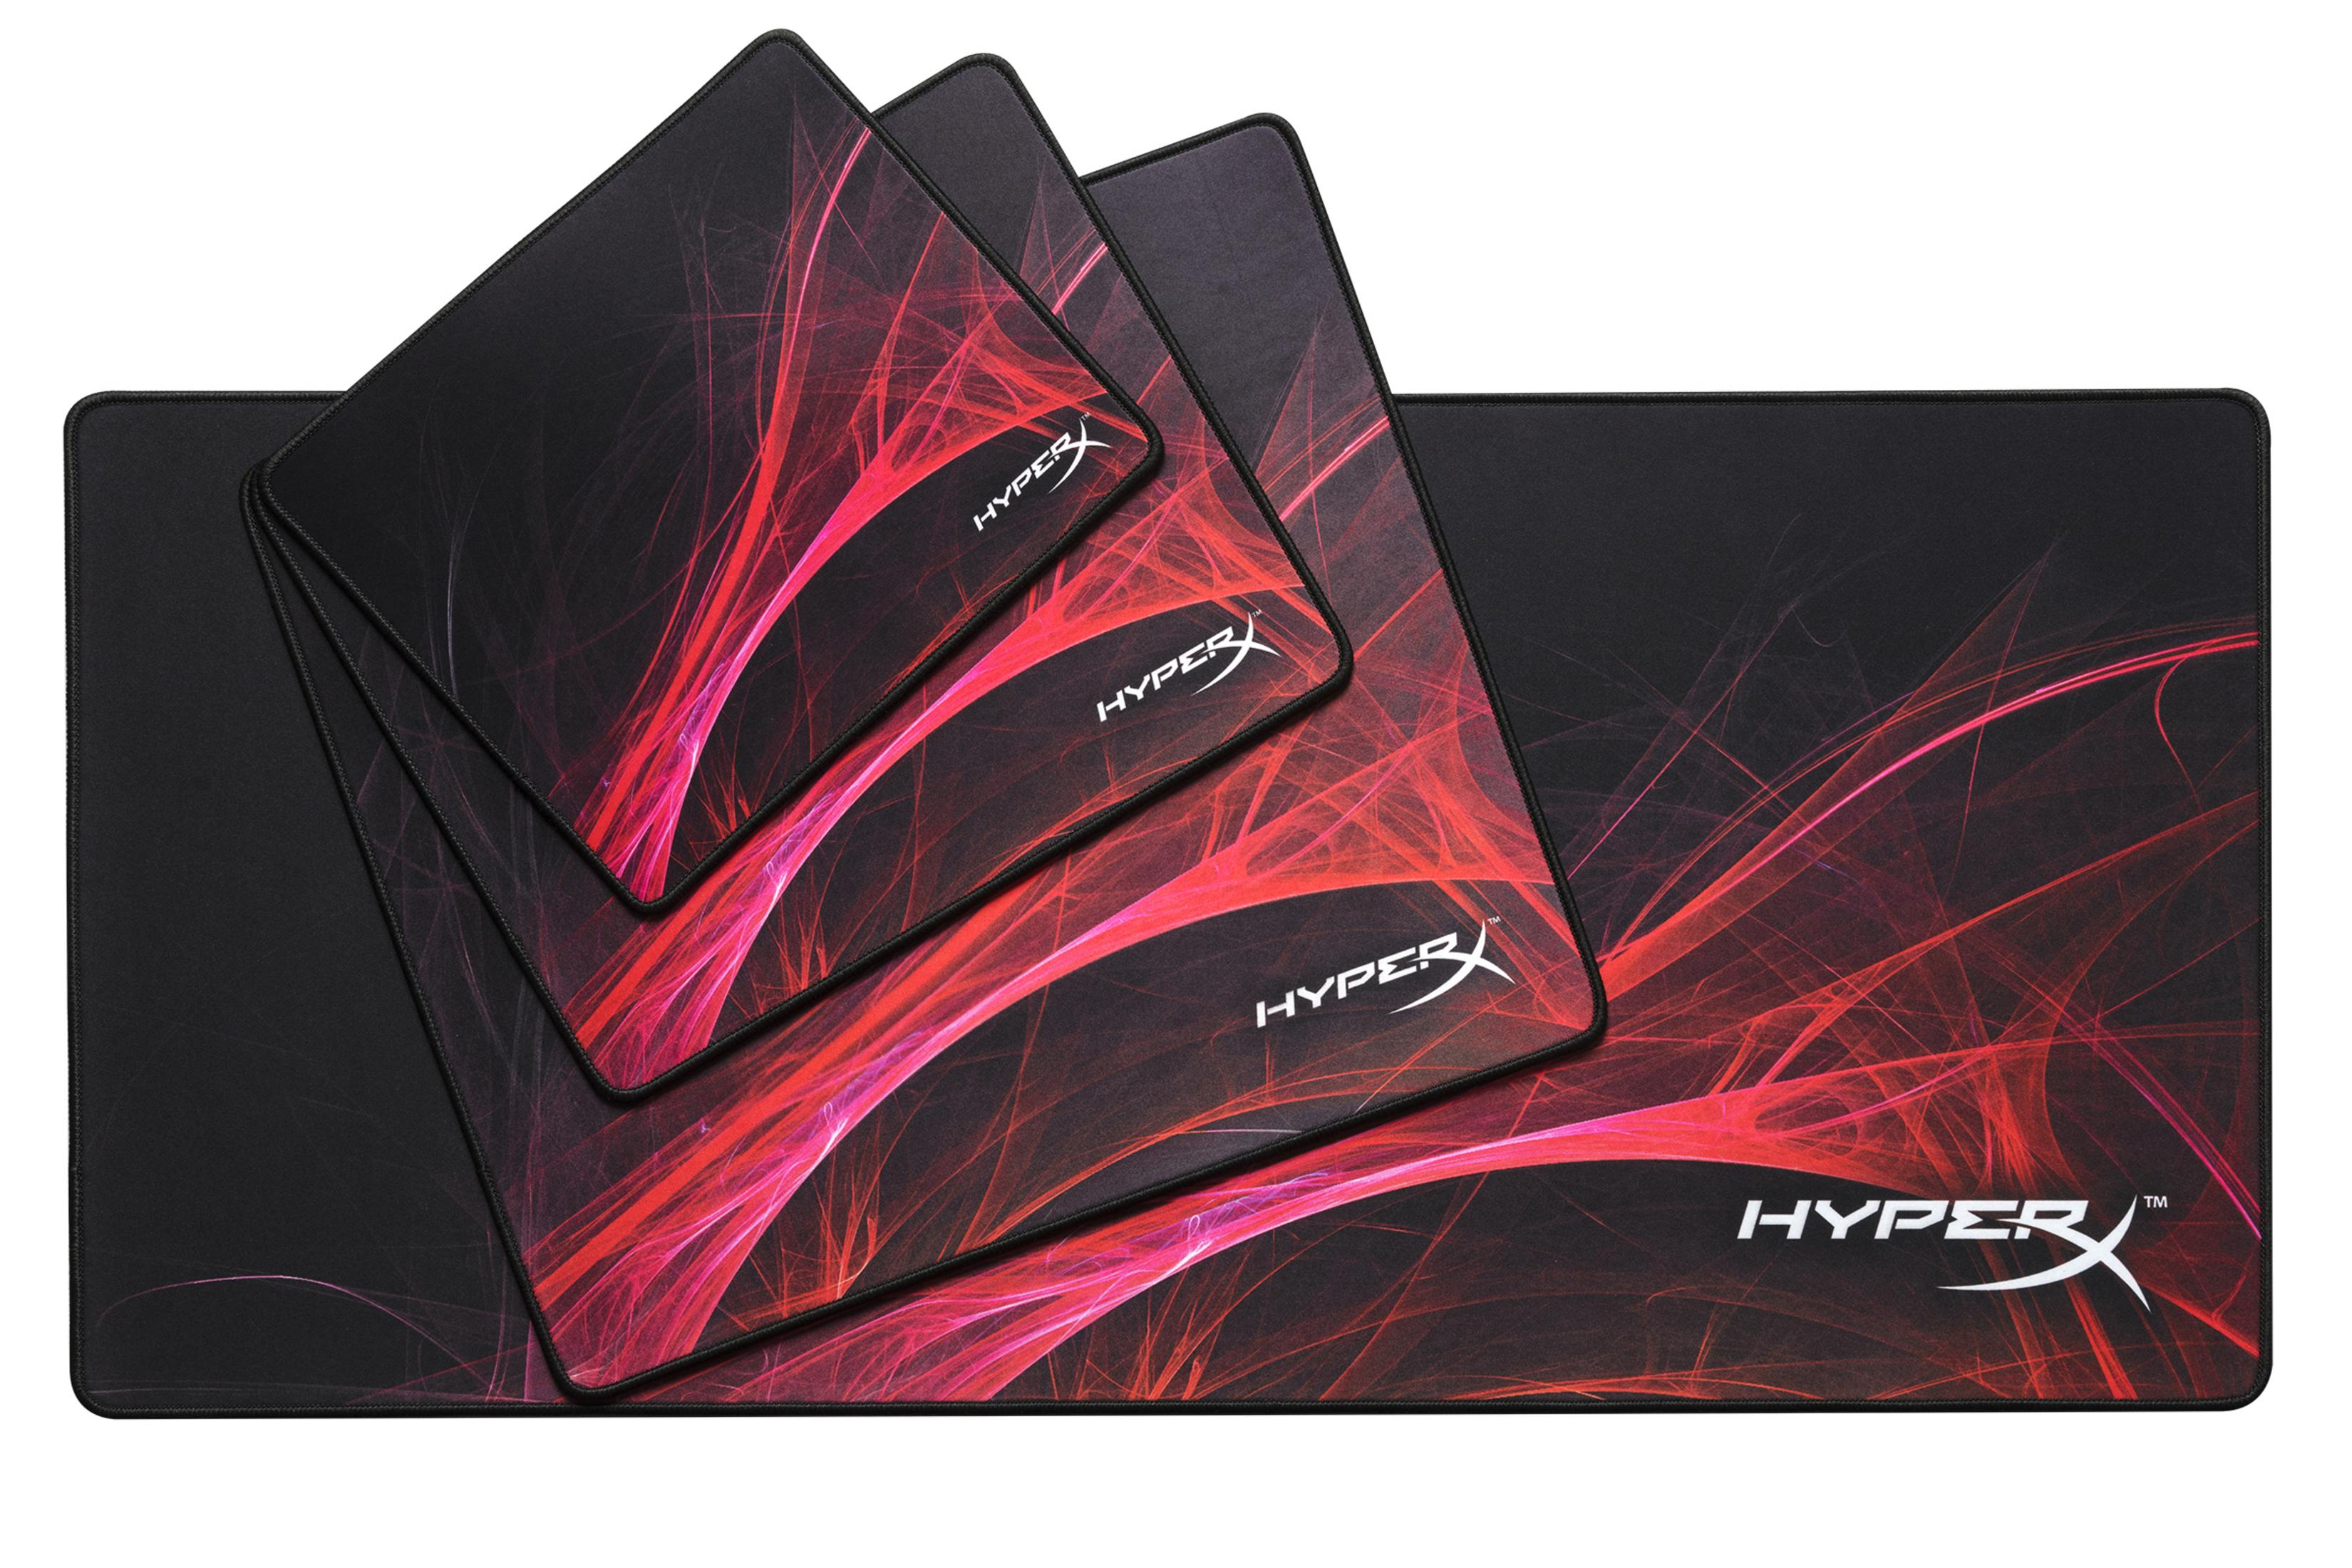 HYPERX 4P5Q7AA FURY S SPEED MOUSE x mm) Mauspad EDITION (290 GAMING mm PRO 240 PAD